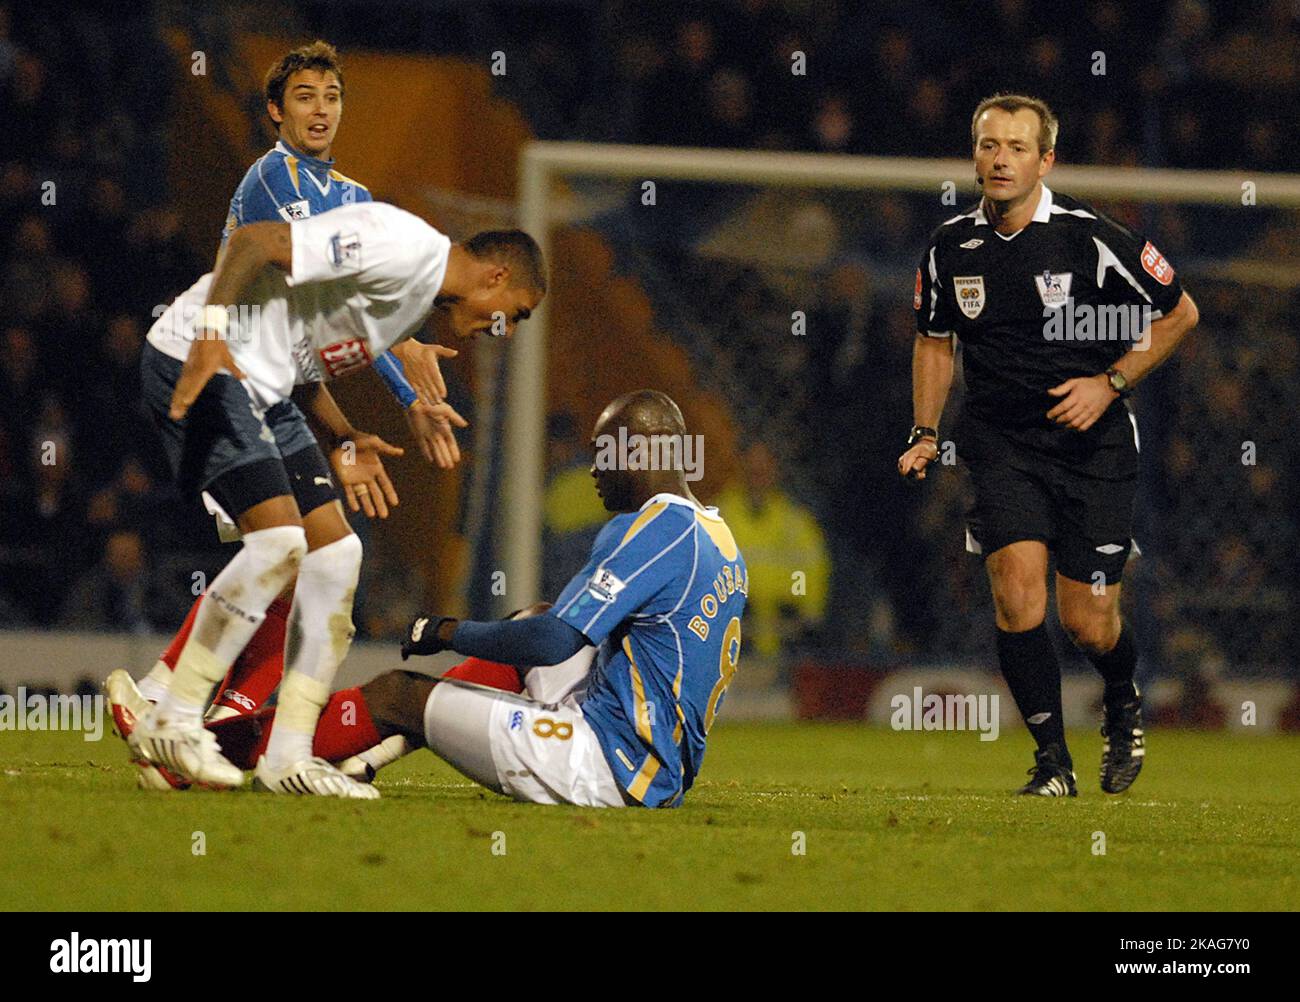 PORTSMOUTH V SPURS KEVIN-PRINCE BOATENG IS UNIMPRESSED WITH PAPA BOUPA DIOP'S CHALLENGE PIC MIKE WALKER, 2007 Stock Photo